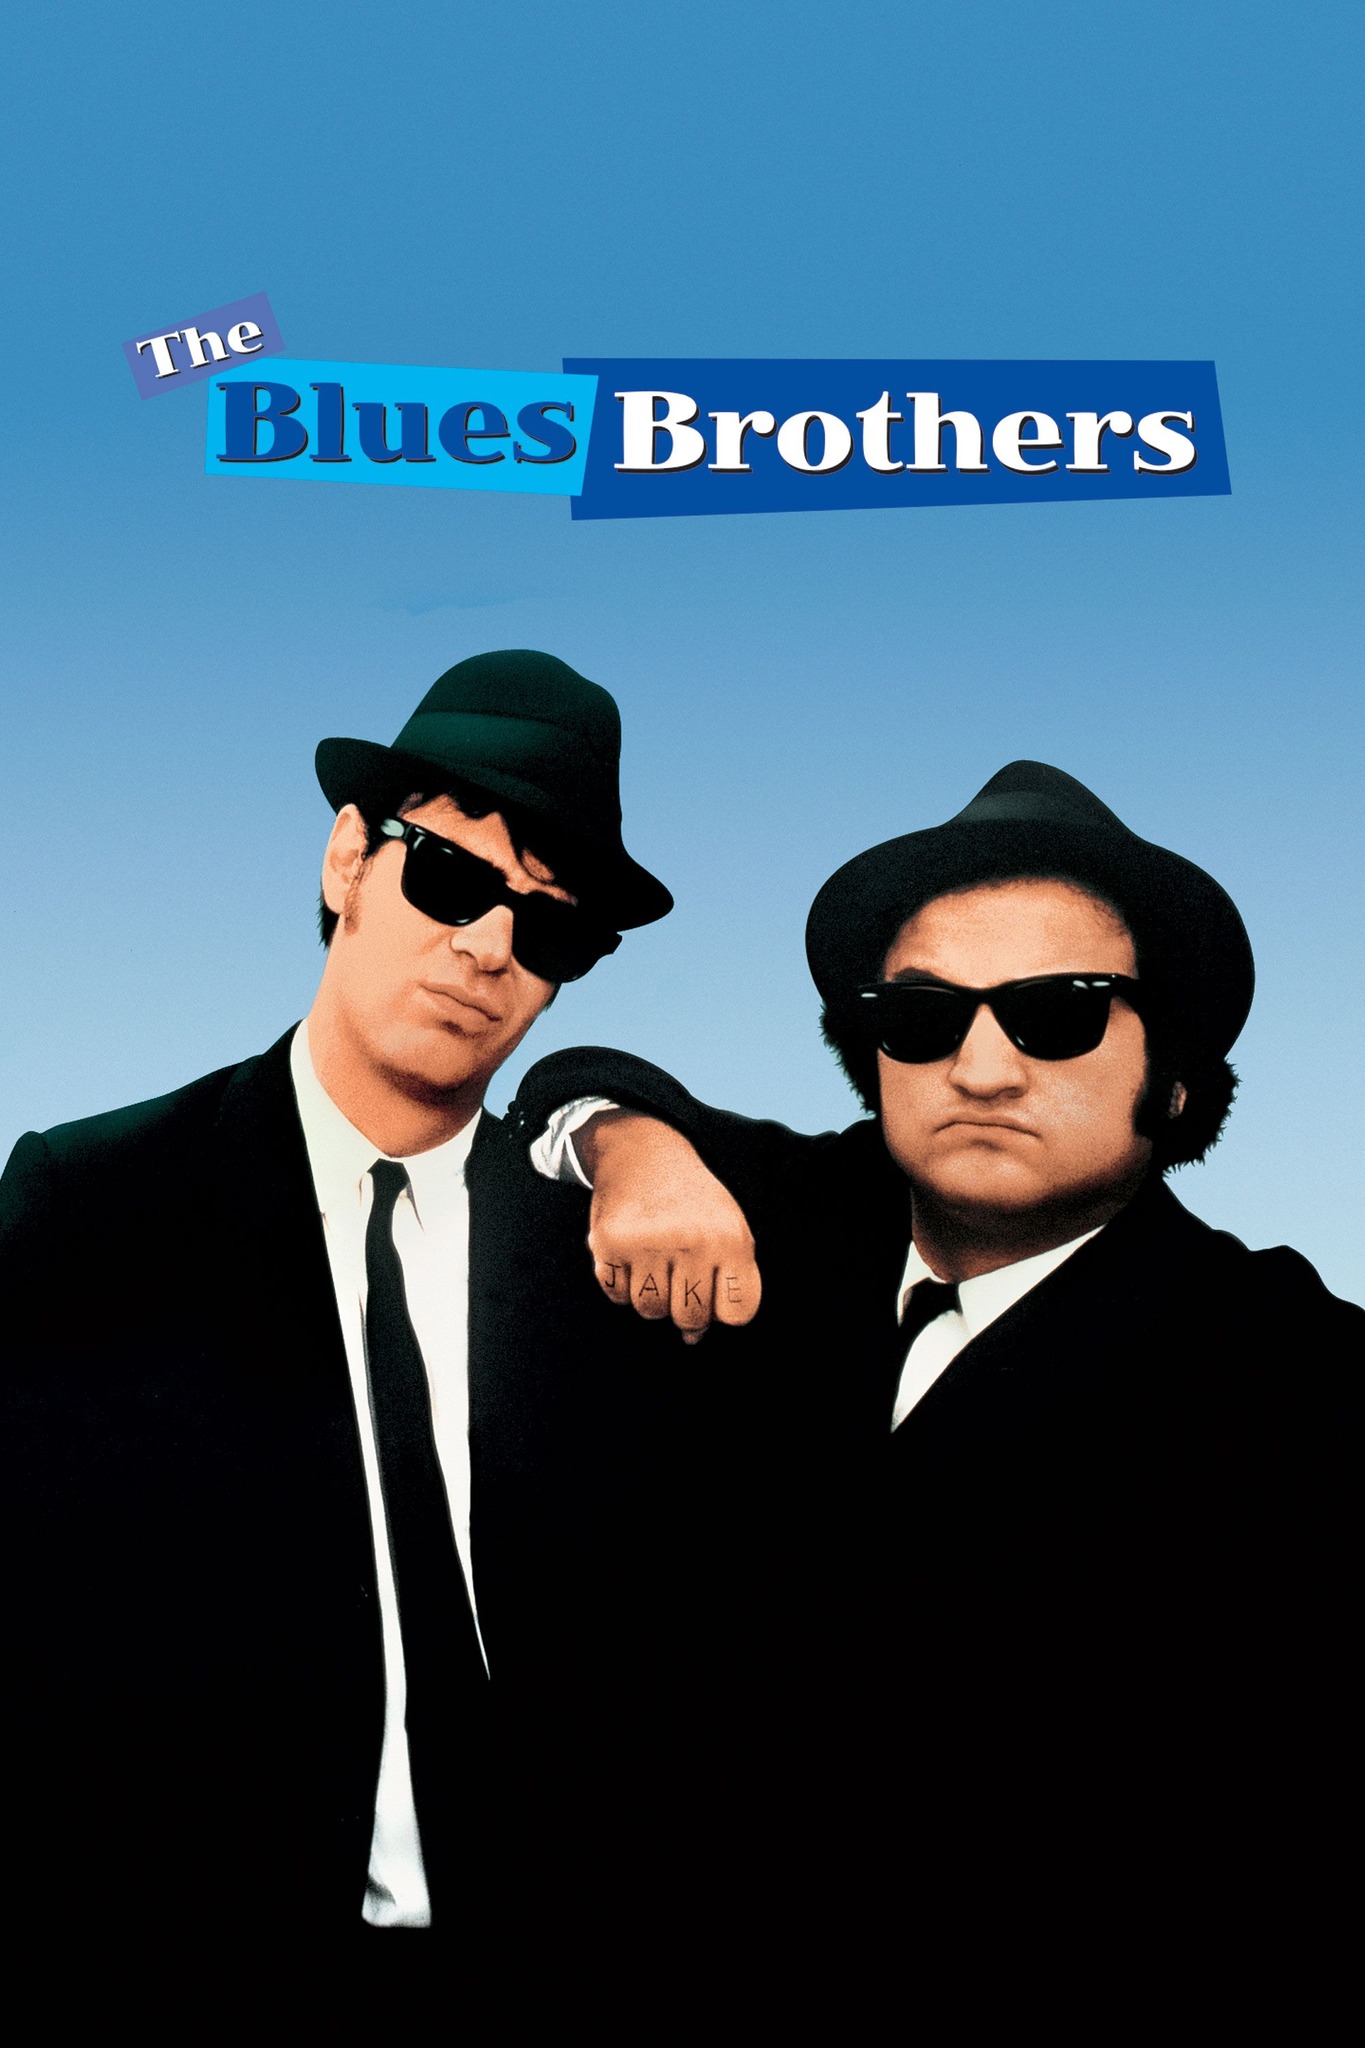 Midweek Matinee: The Blues Brothers